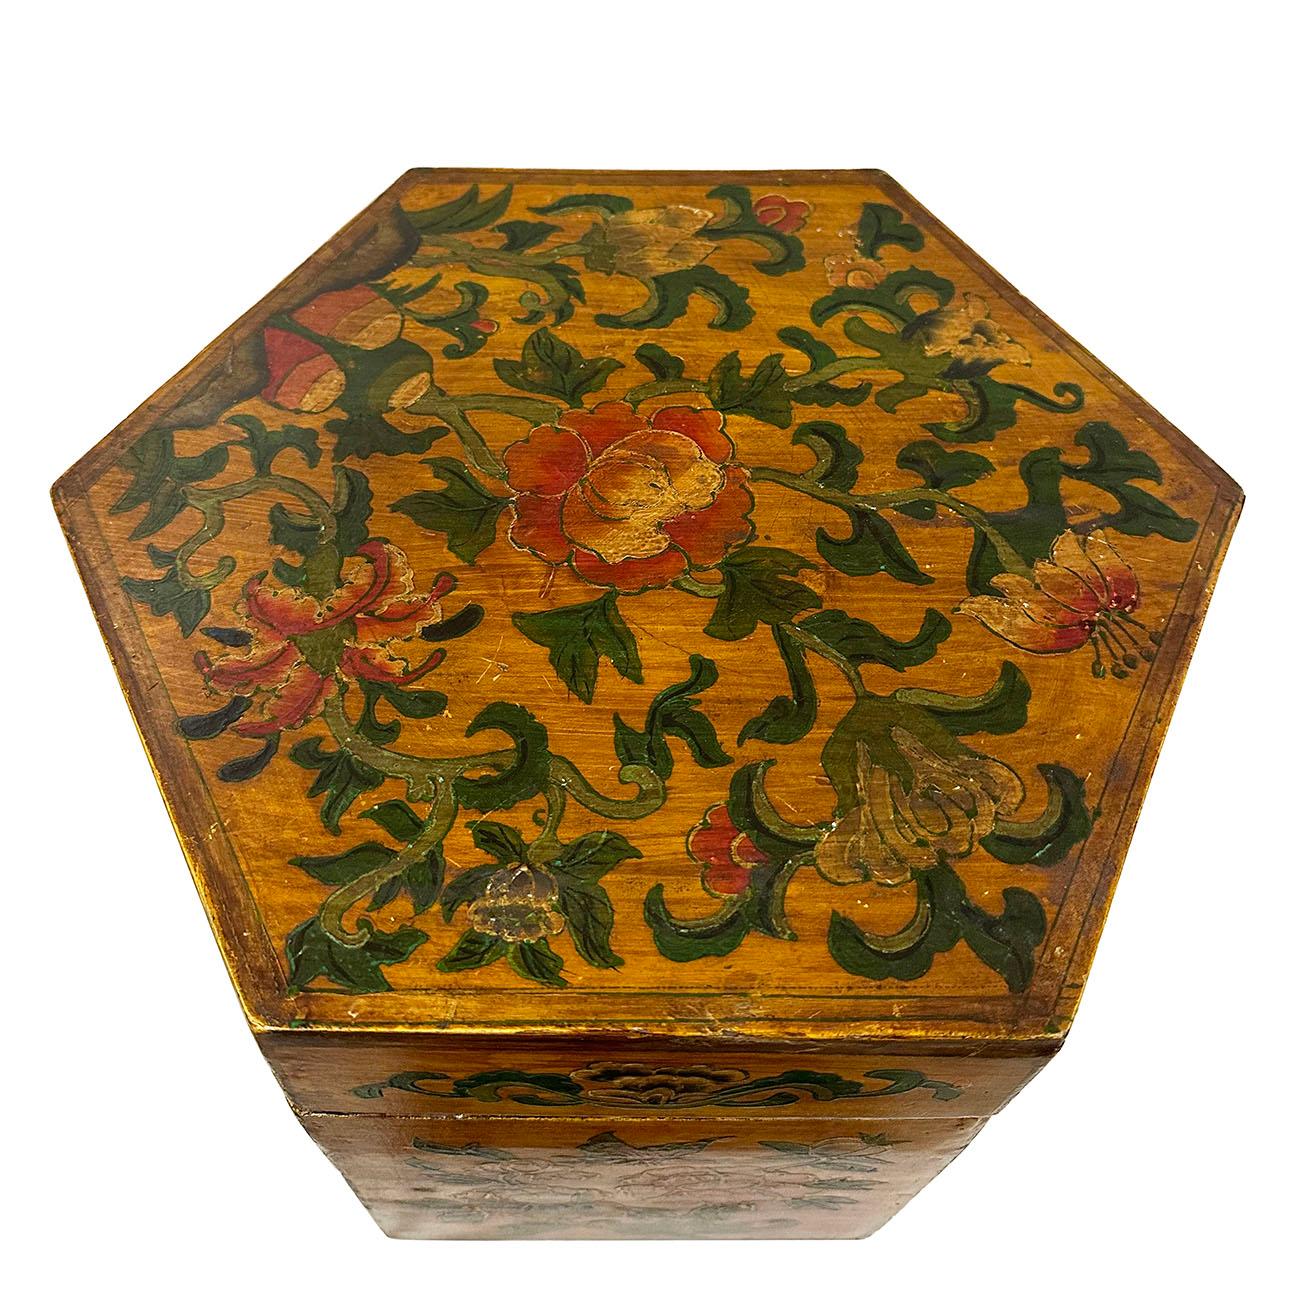 This unique vintage Chinese sewing box is 100 percent hand made and hand painted with traditional Chinese painting on the side and lid of the box. It was made from wood panels connected together with hand painted Chinese forks arts of floral